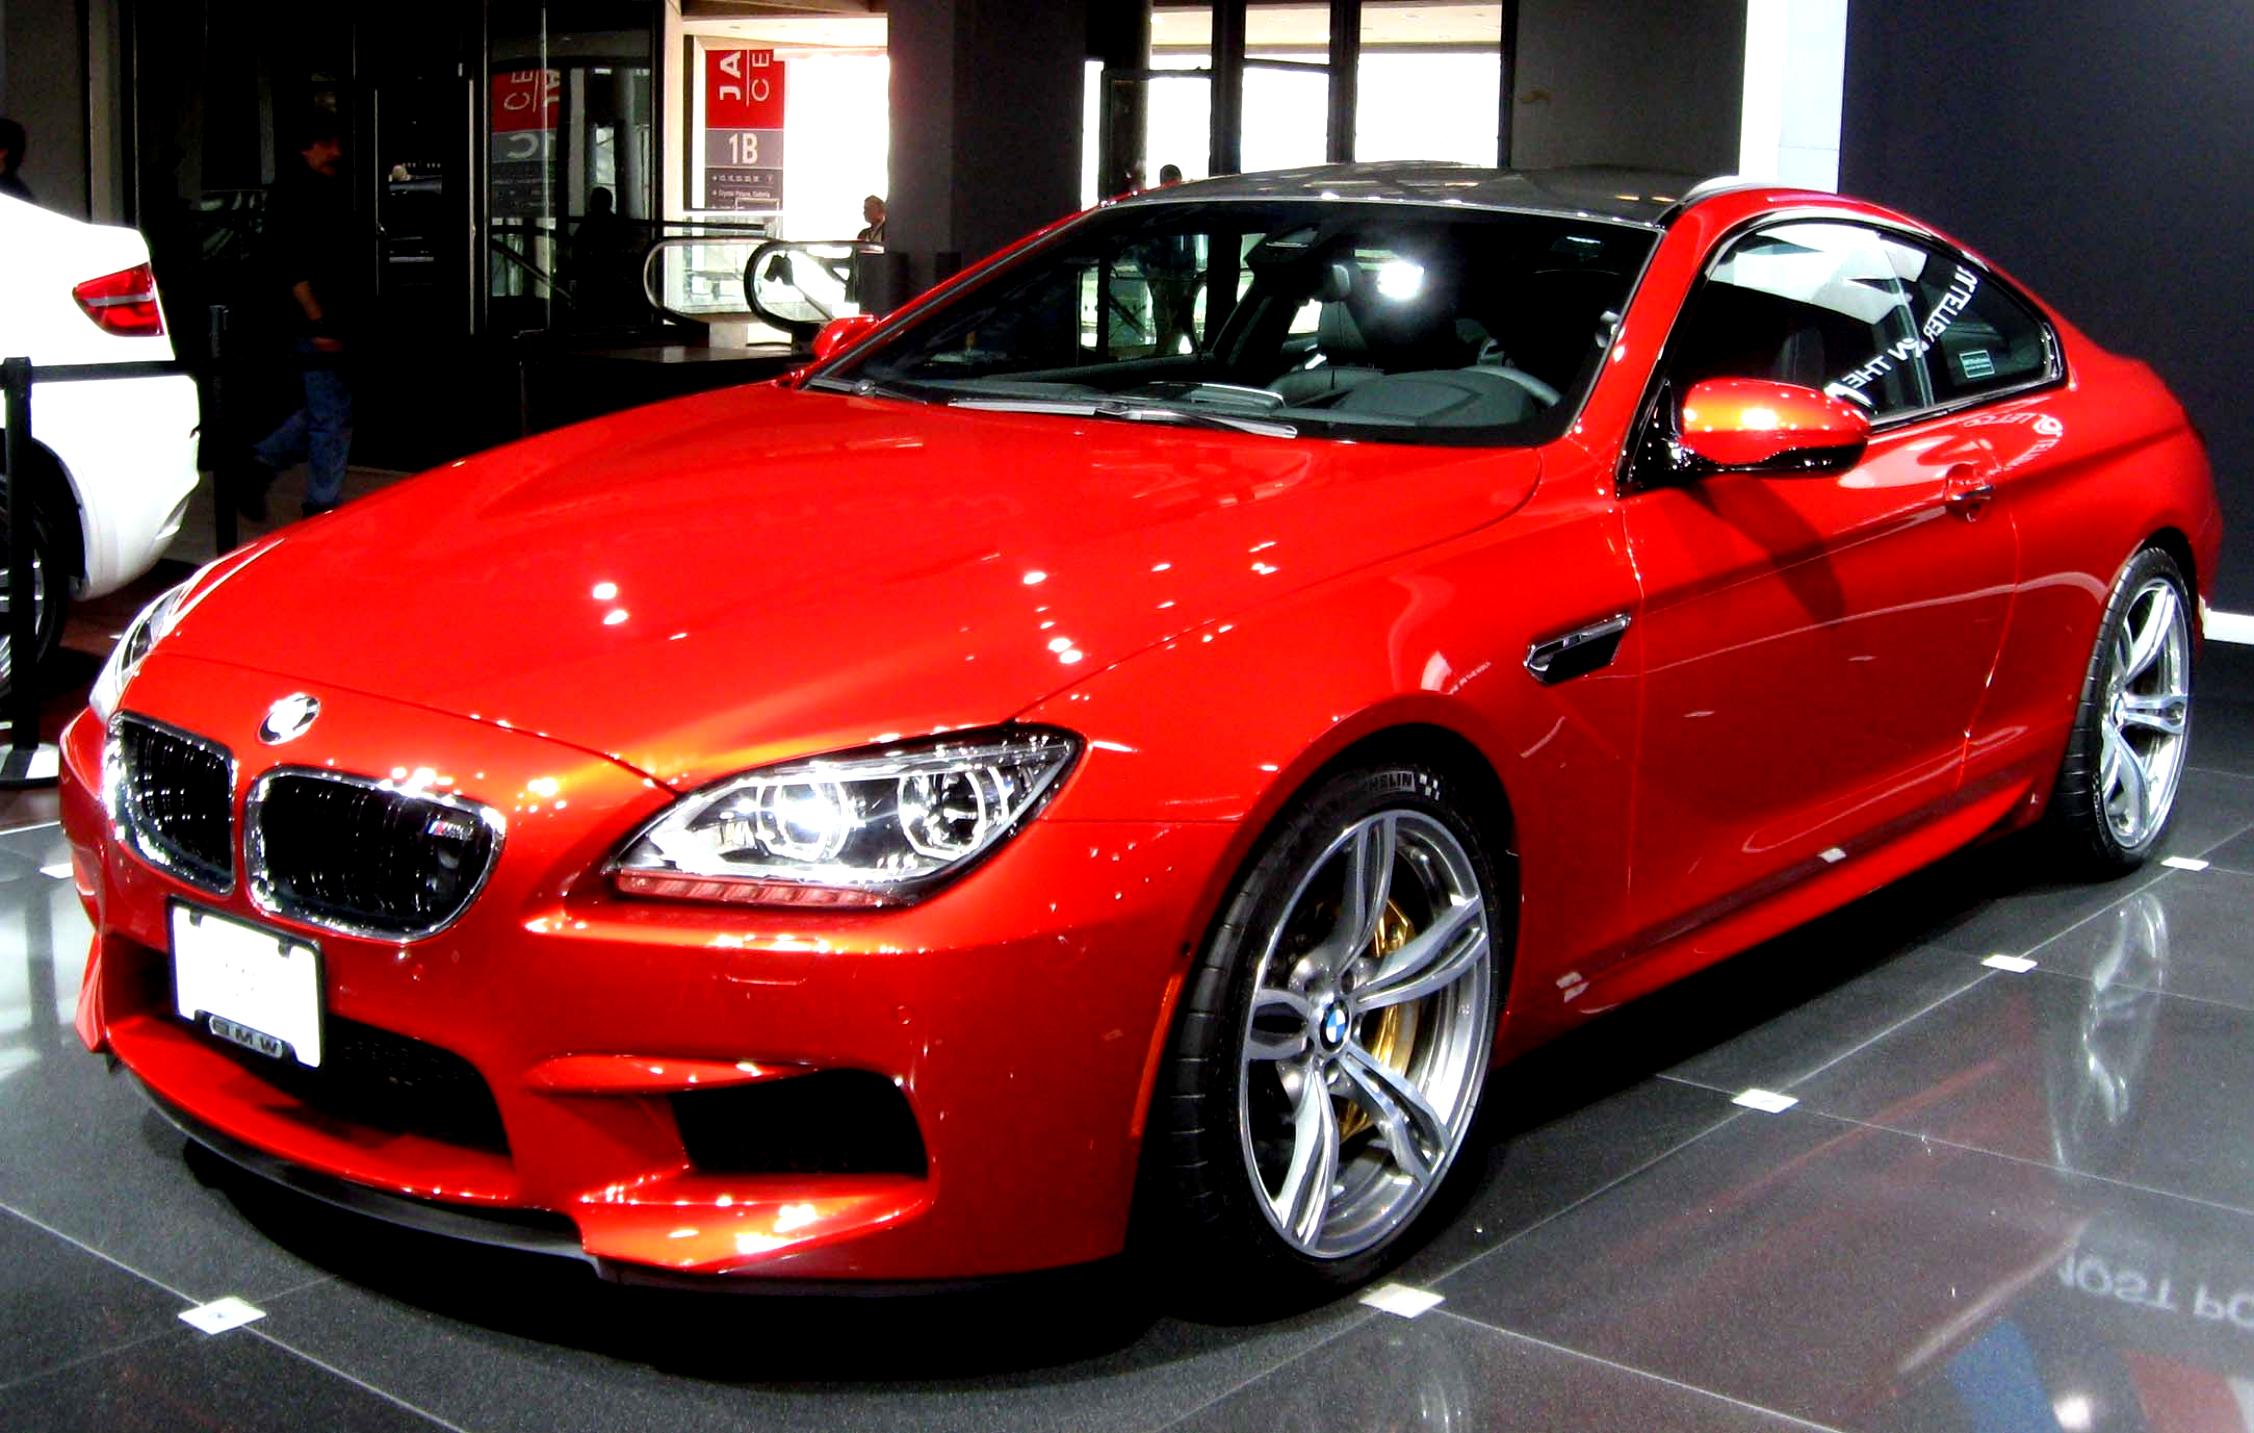 BMW M6 Coupe F13 2012 #2